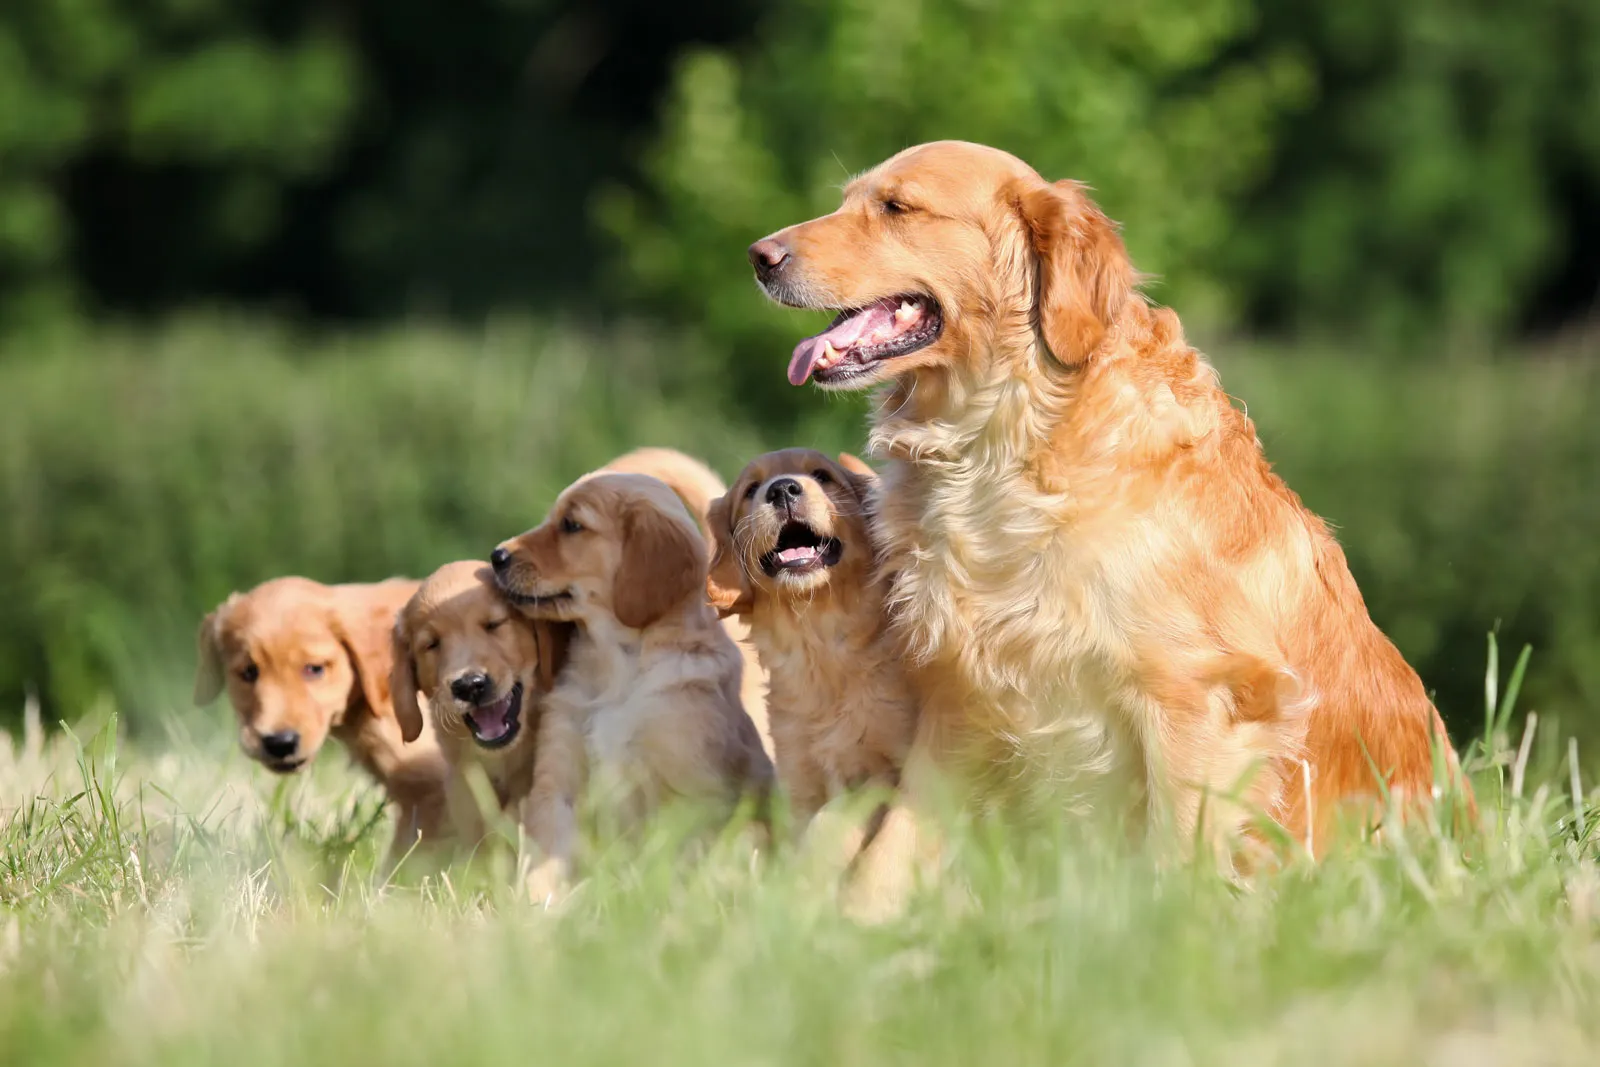 What Is So Special About Golden Retrievers?